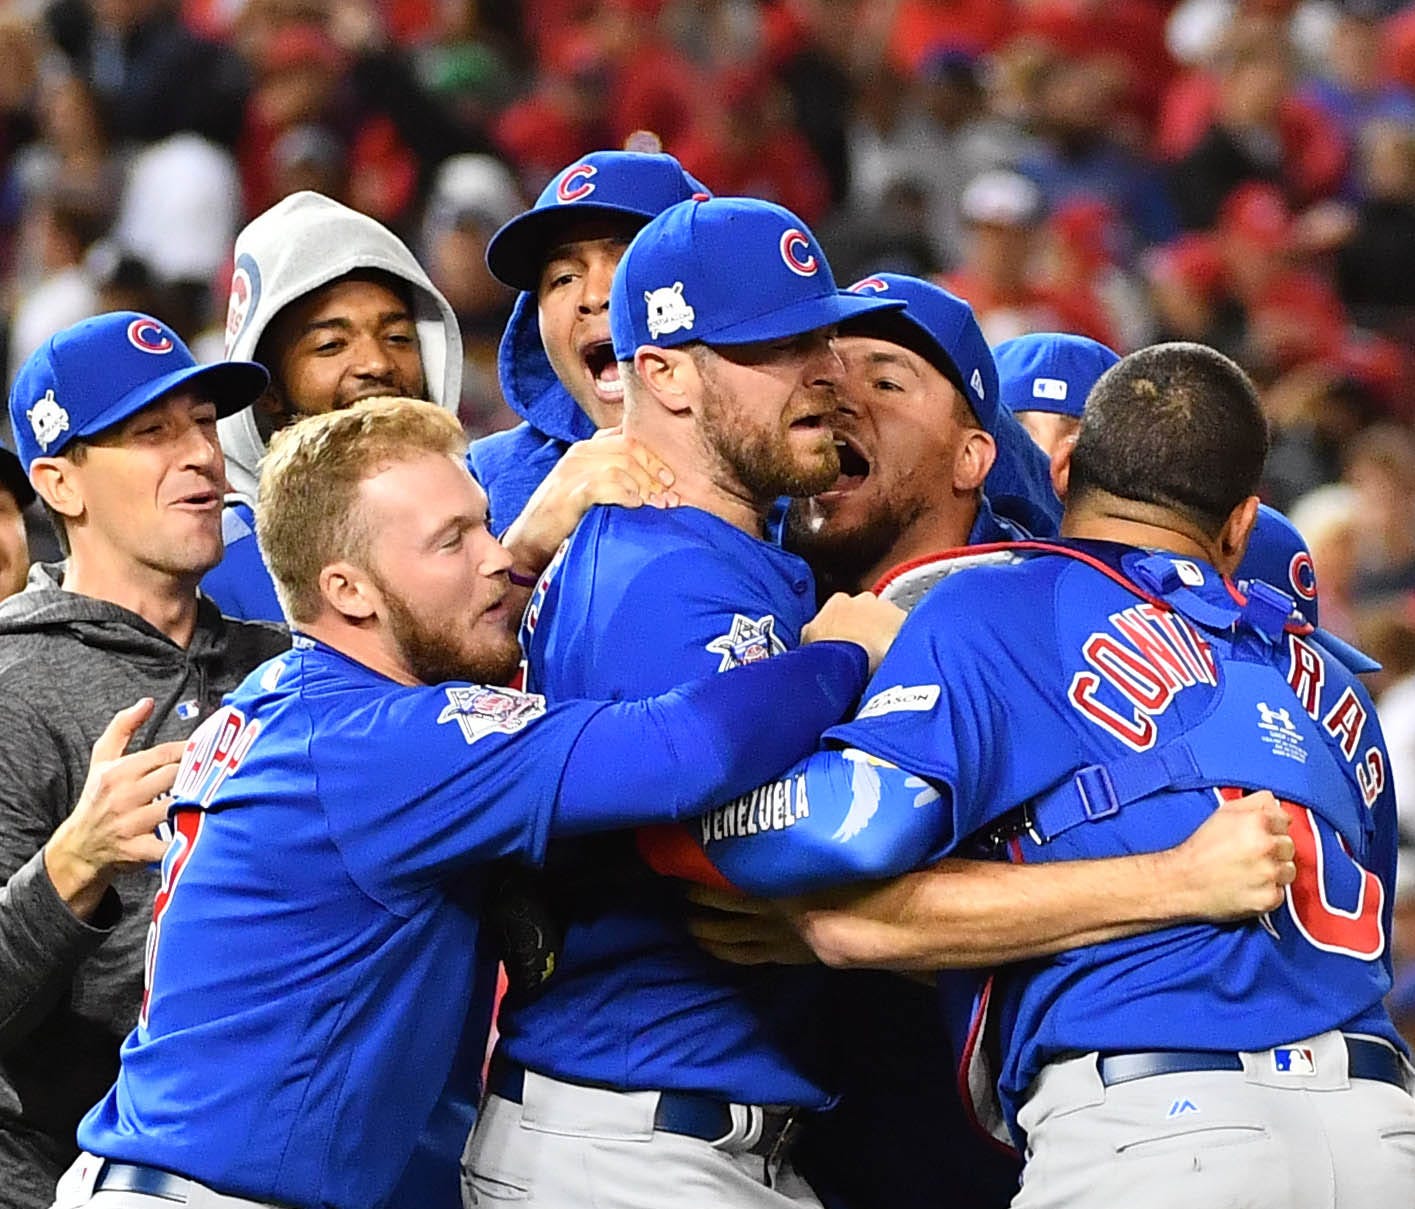 After celebrating their NLDS victory against the Nationals, the Cubs had their flight to Los Angeles was diverted to Albuquerque.